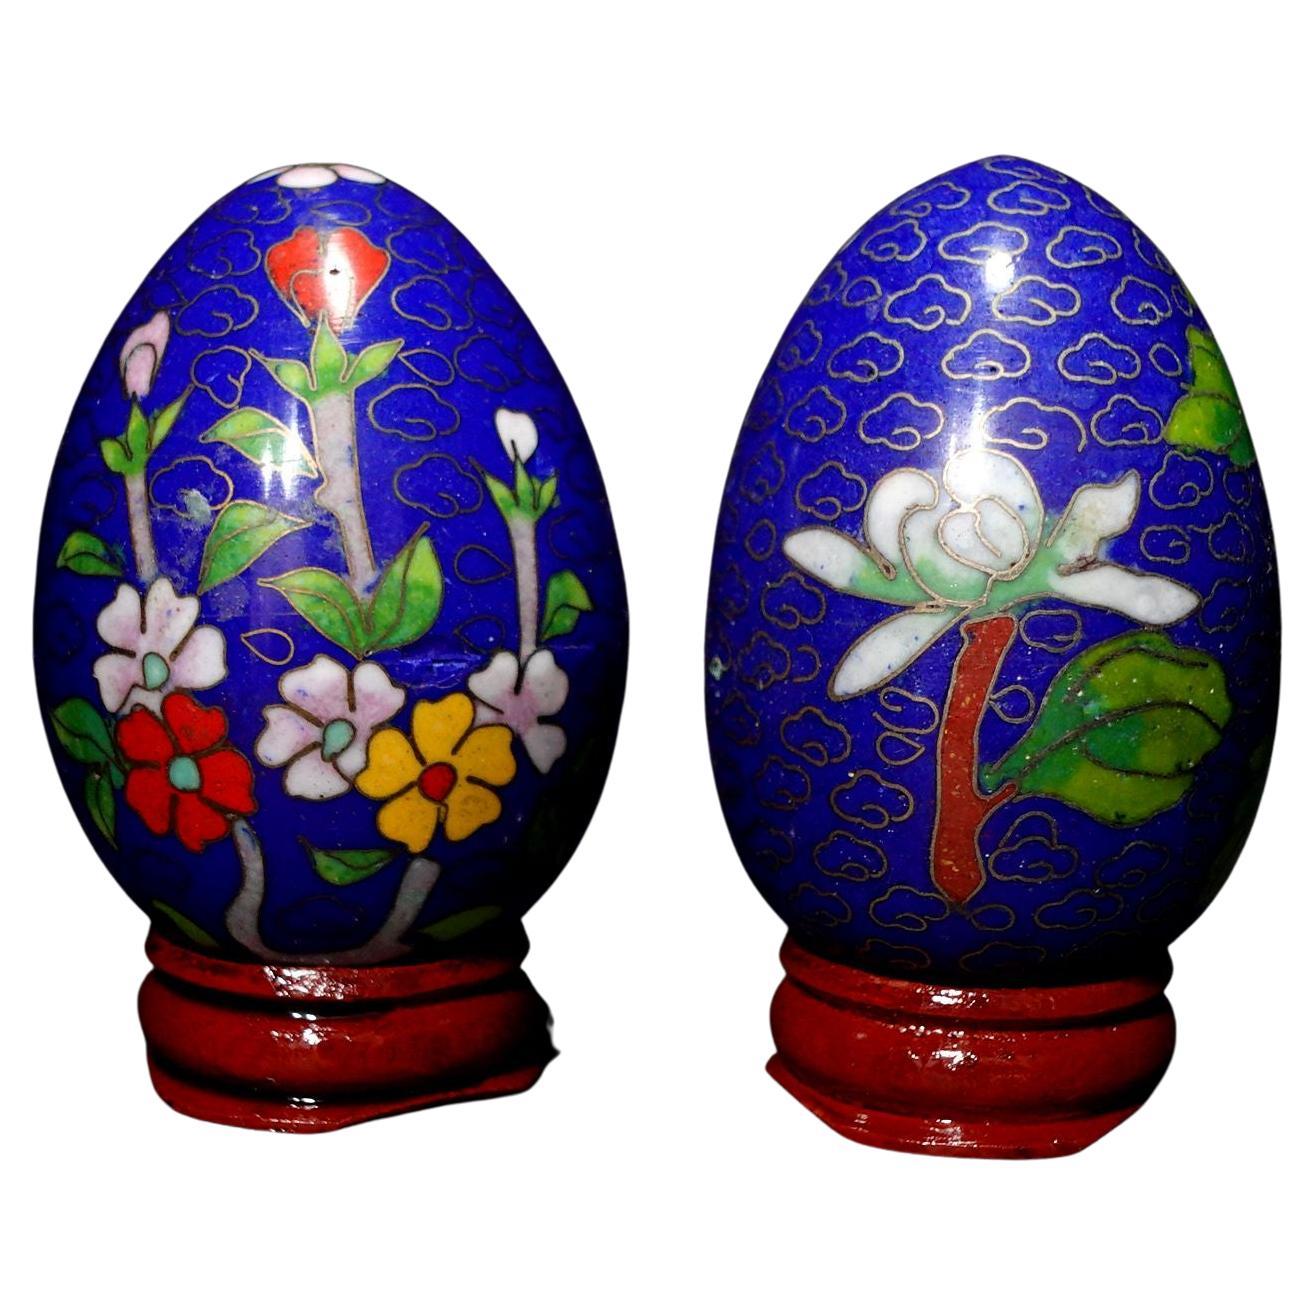 Two Chinese Cloisonné Enamel Eggs "Flowers" with Wood Stands #10 For Sale